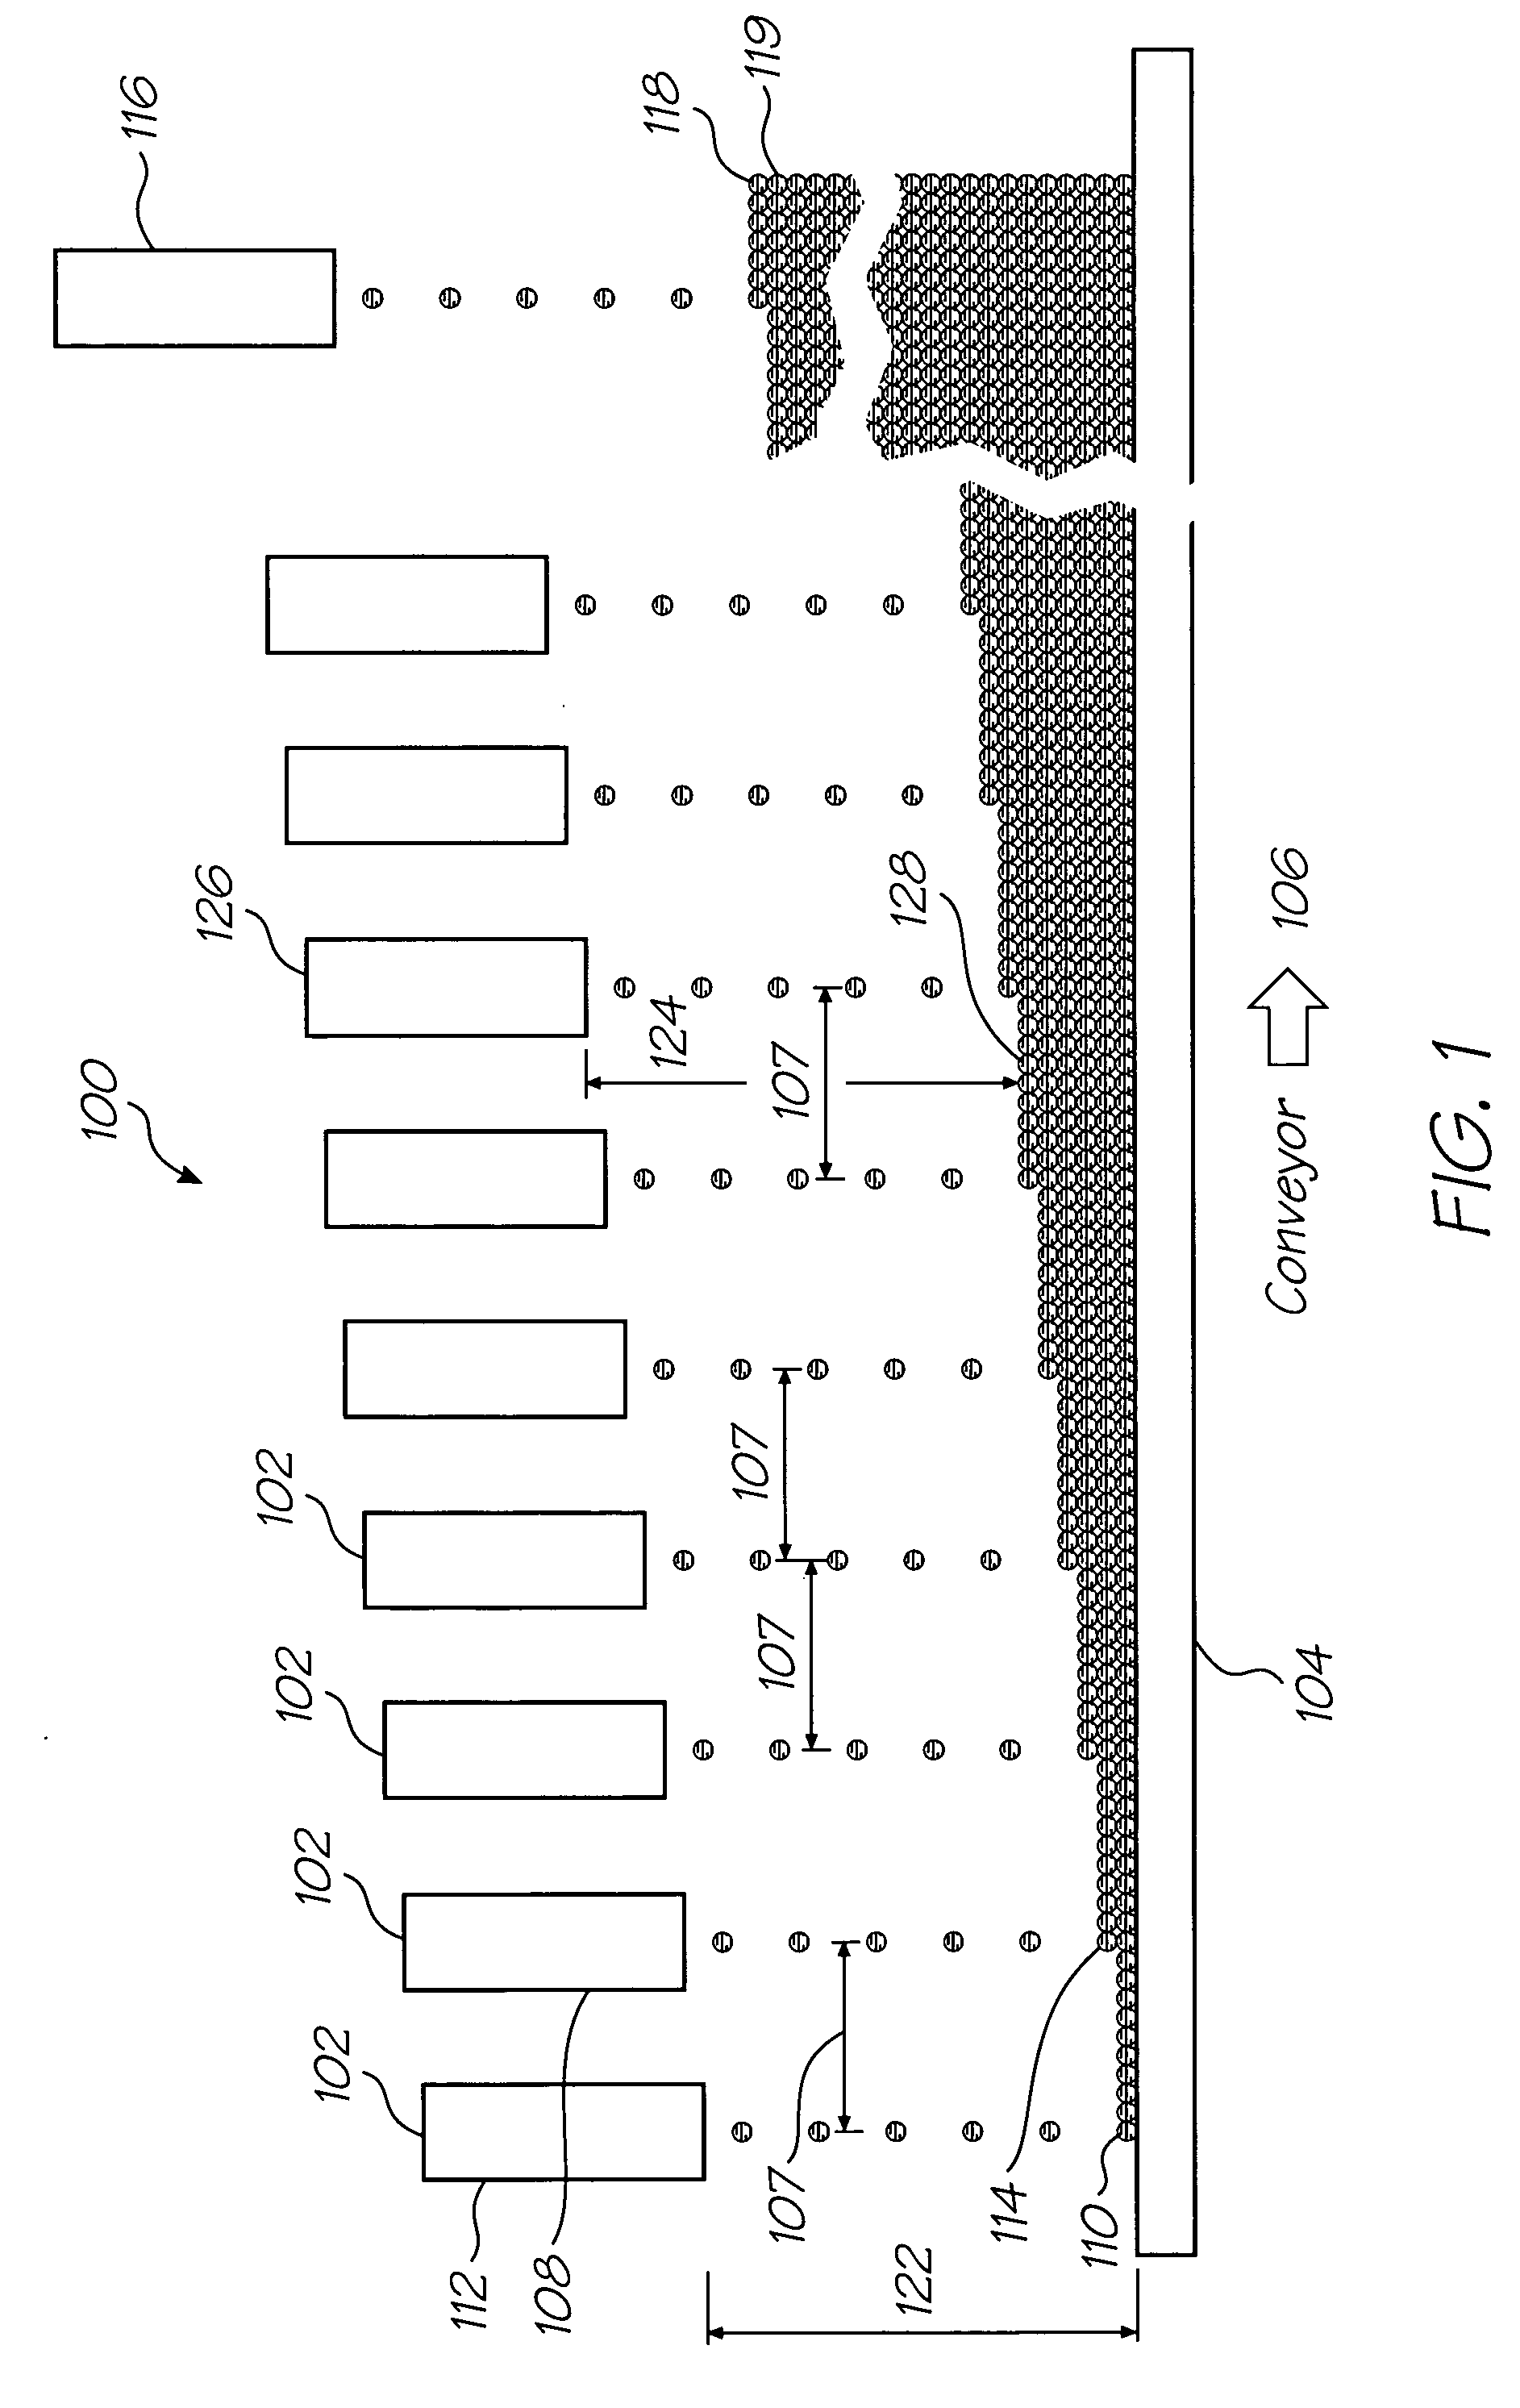 3-D object creation system using multiple materials in multiple layers